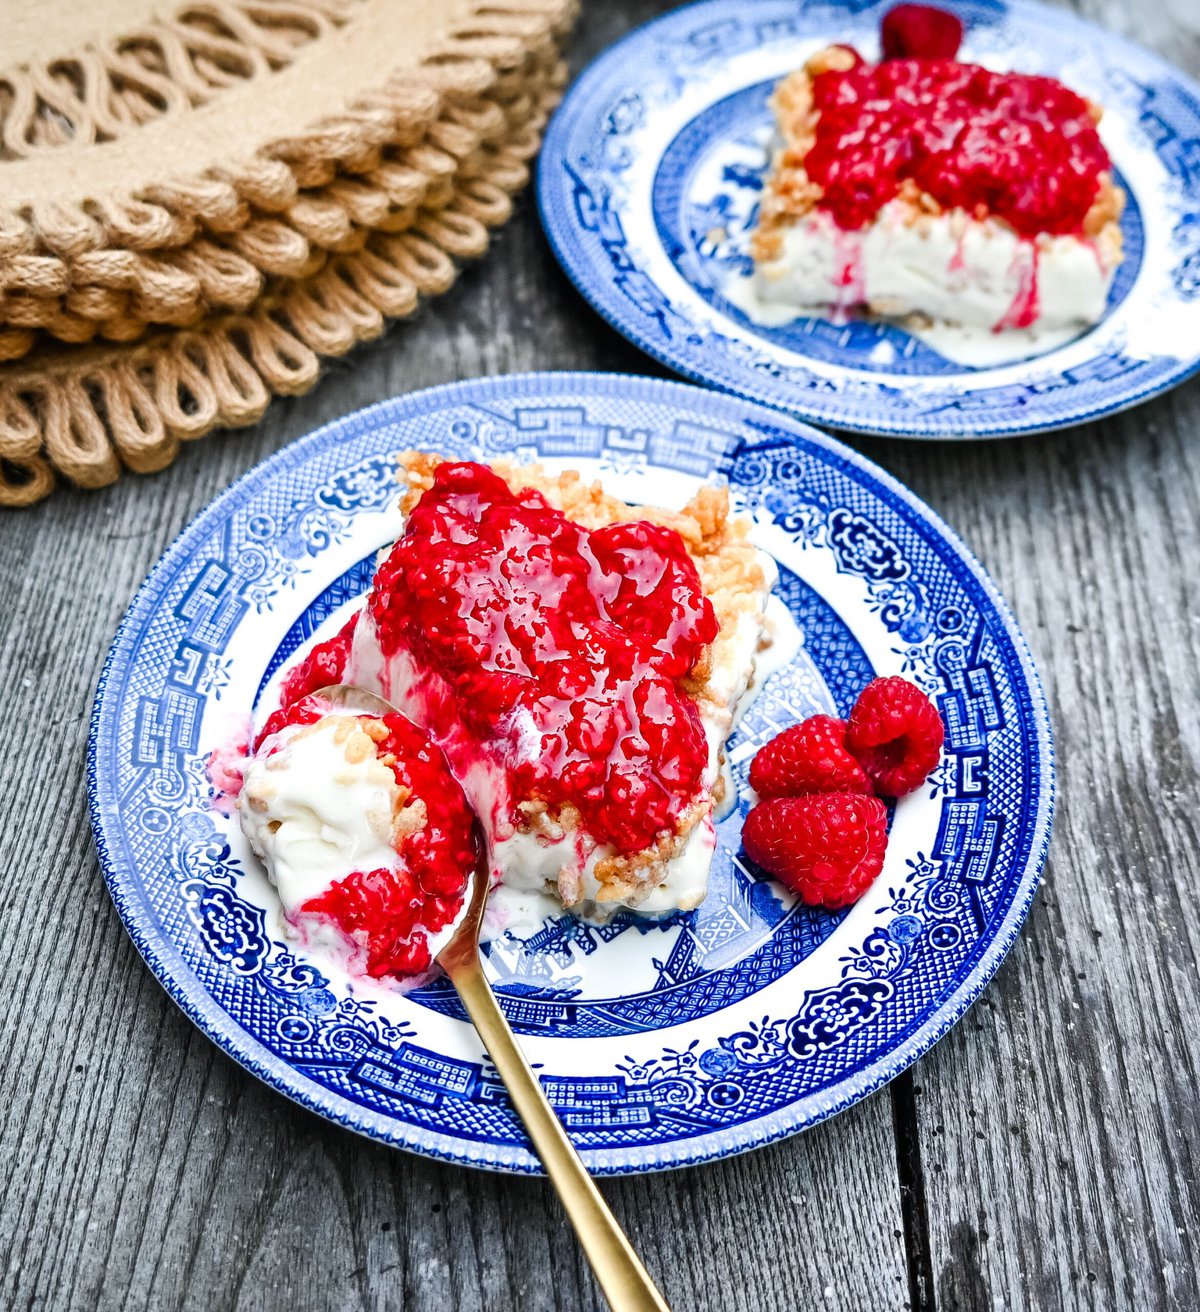 Crunchy Munchy Ice Cream Dessert. This popular ice cream dessert has a crunchy topping made with browned butter, sugar, and Rice Krispies cereal and is layered between vanilla ice cream and topped with a homemade raspberry sauce. The best ice cream dessert recipe!